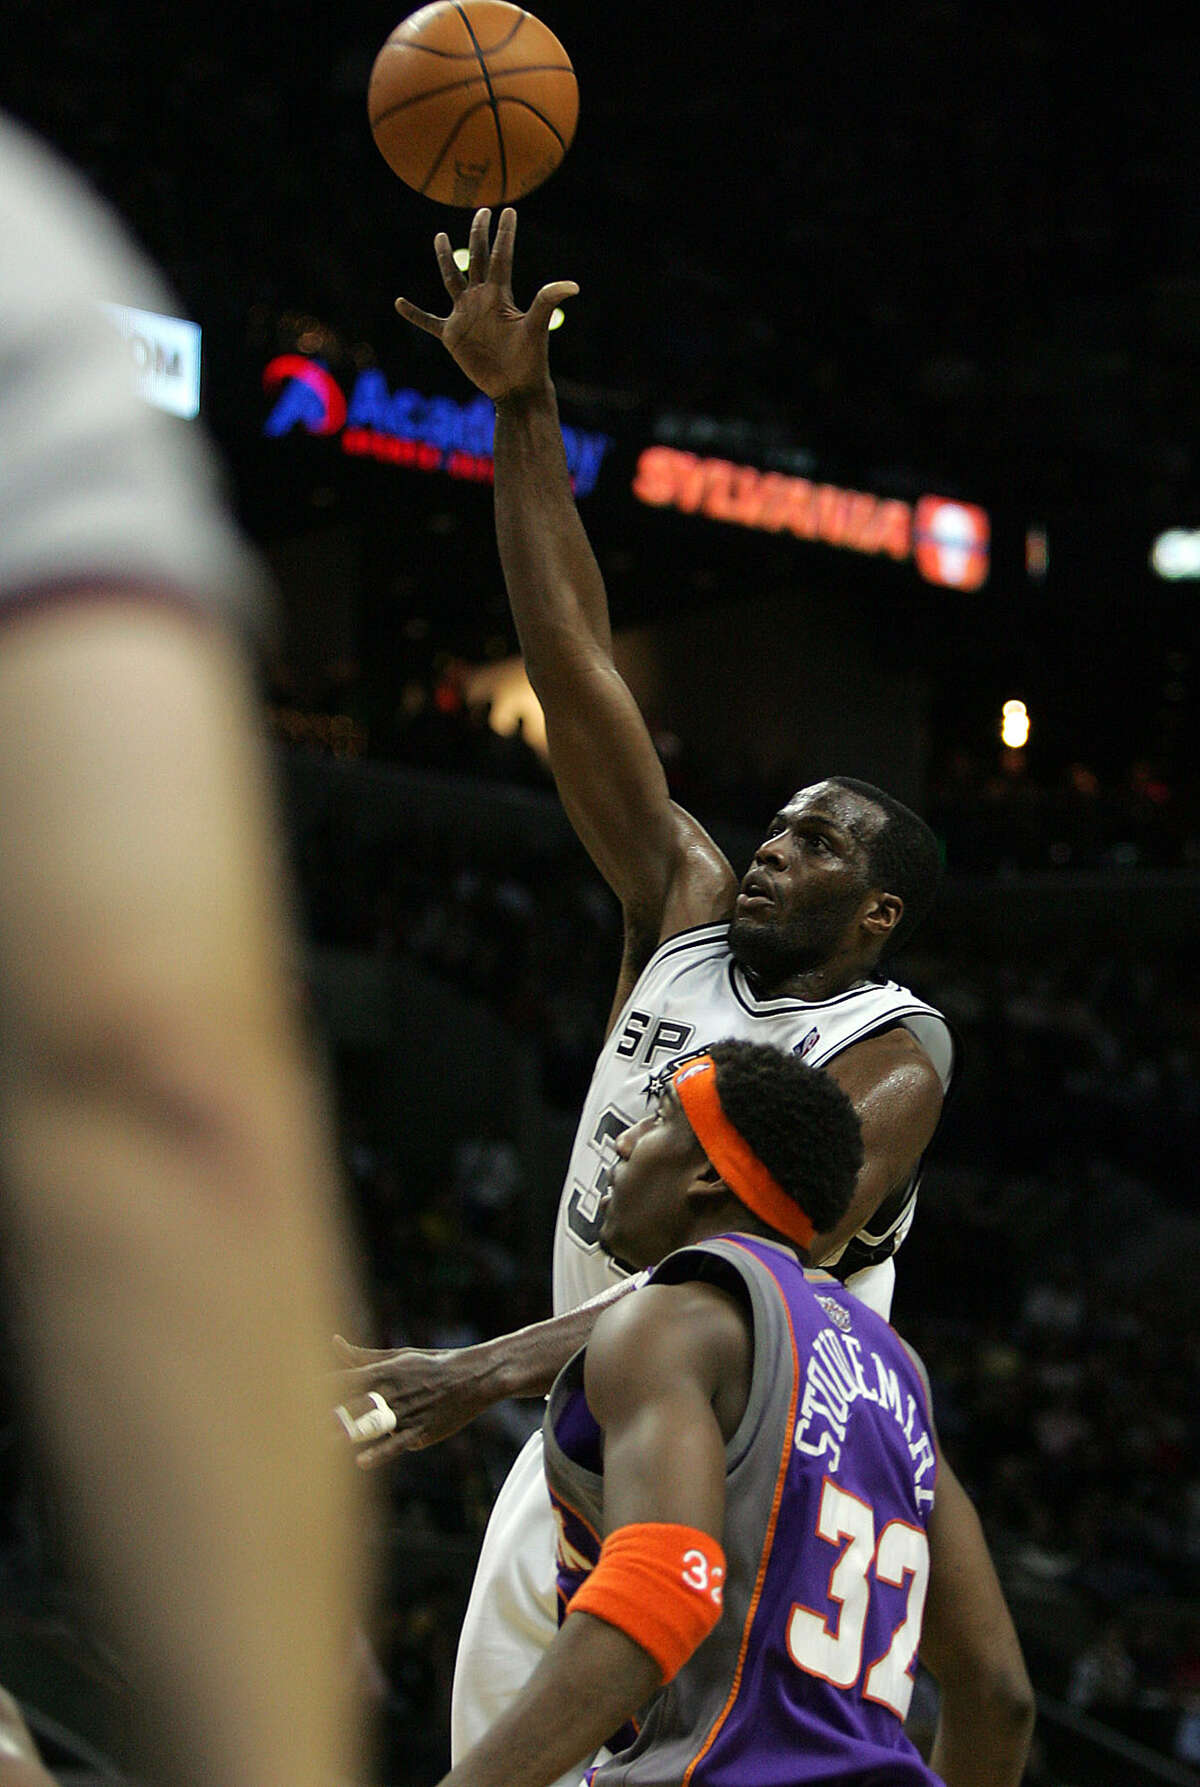 Spurs’ Malik Rose shoots over the Phoenix Suns’ Amare Stoudemire in the first half at the SBC Center on Dec. 28, 2004.